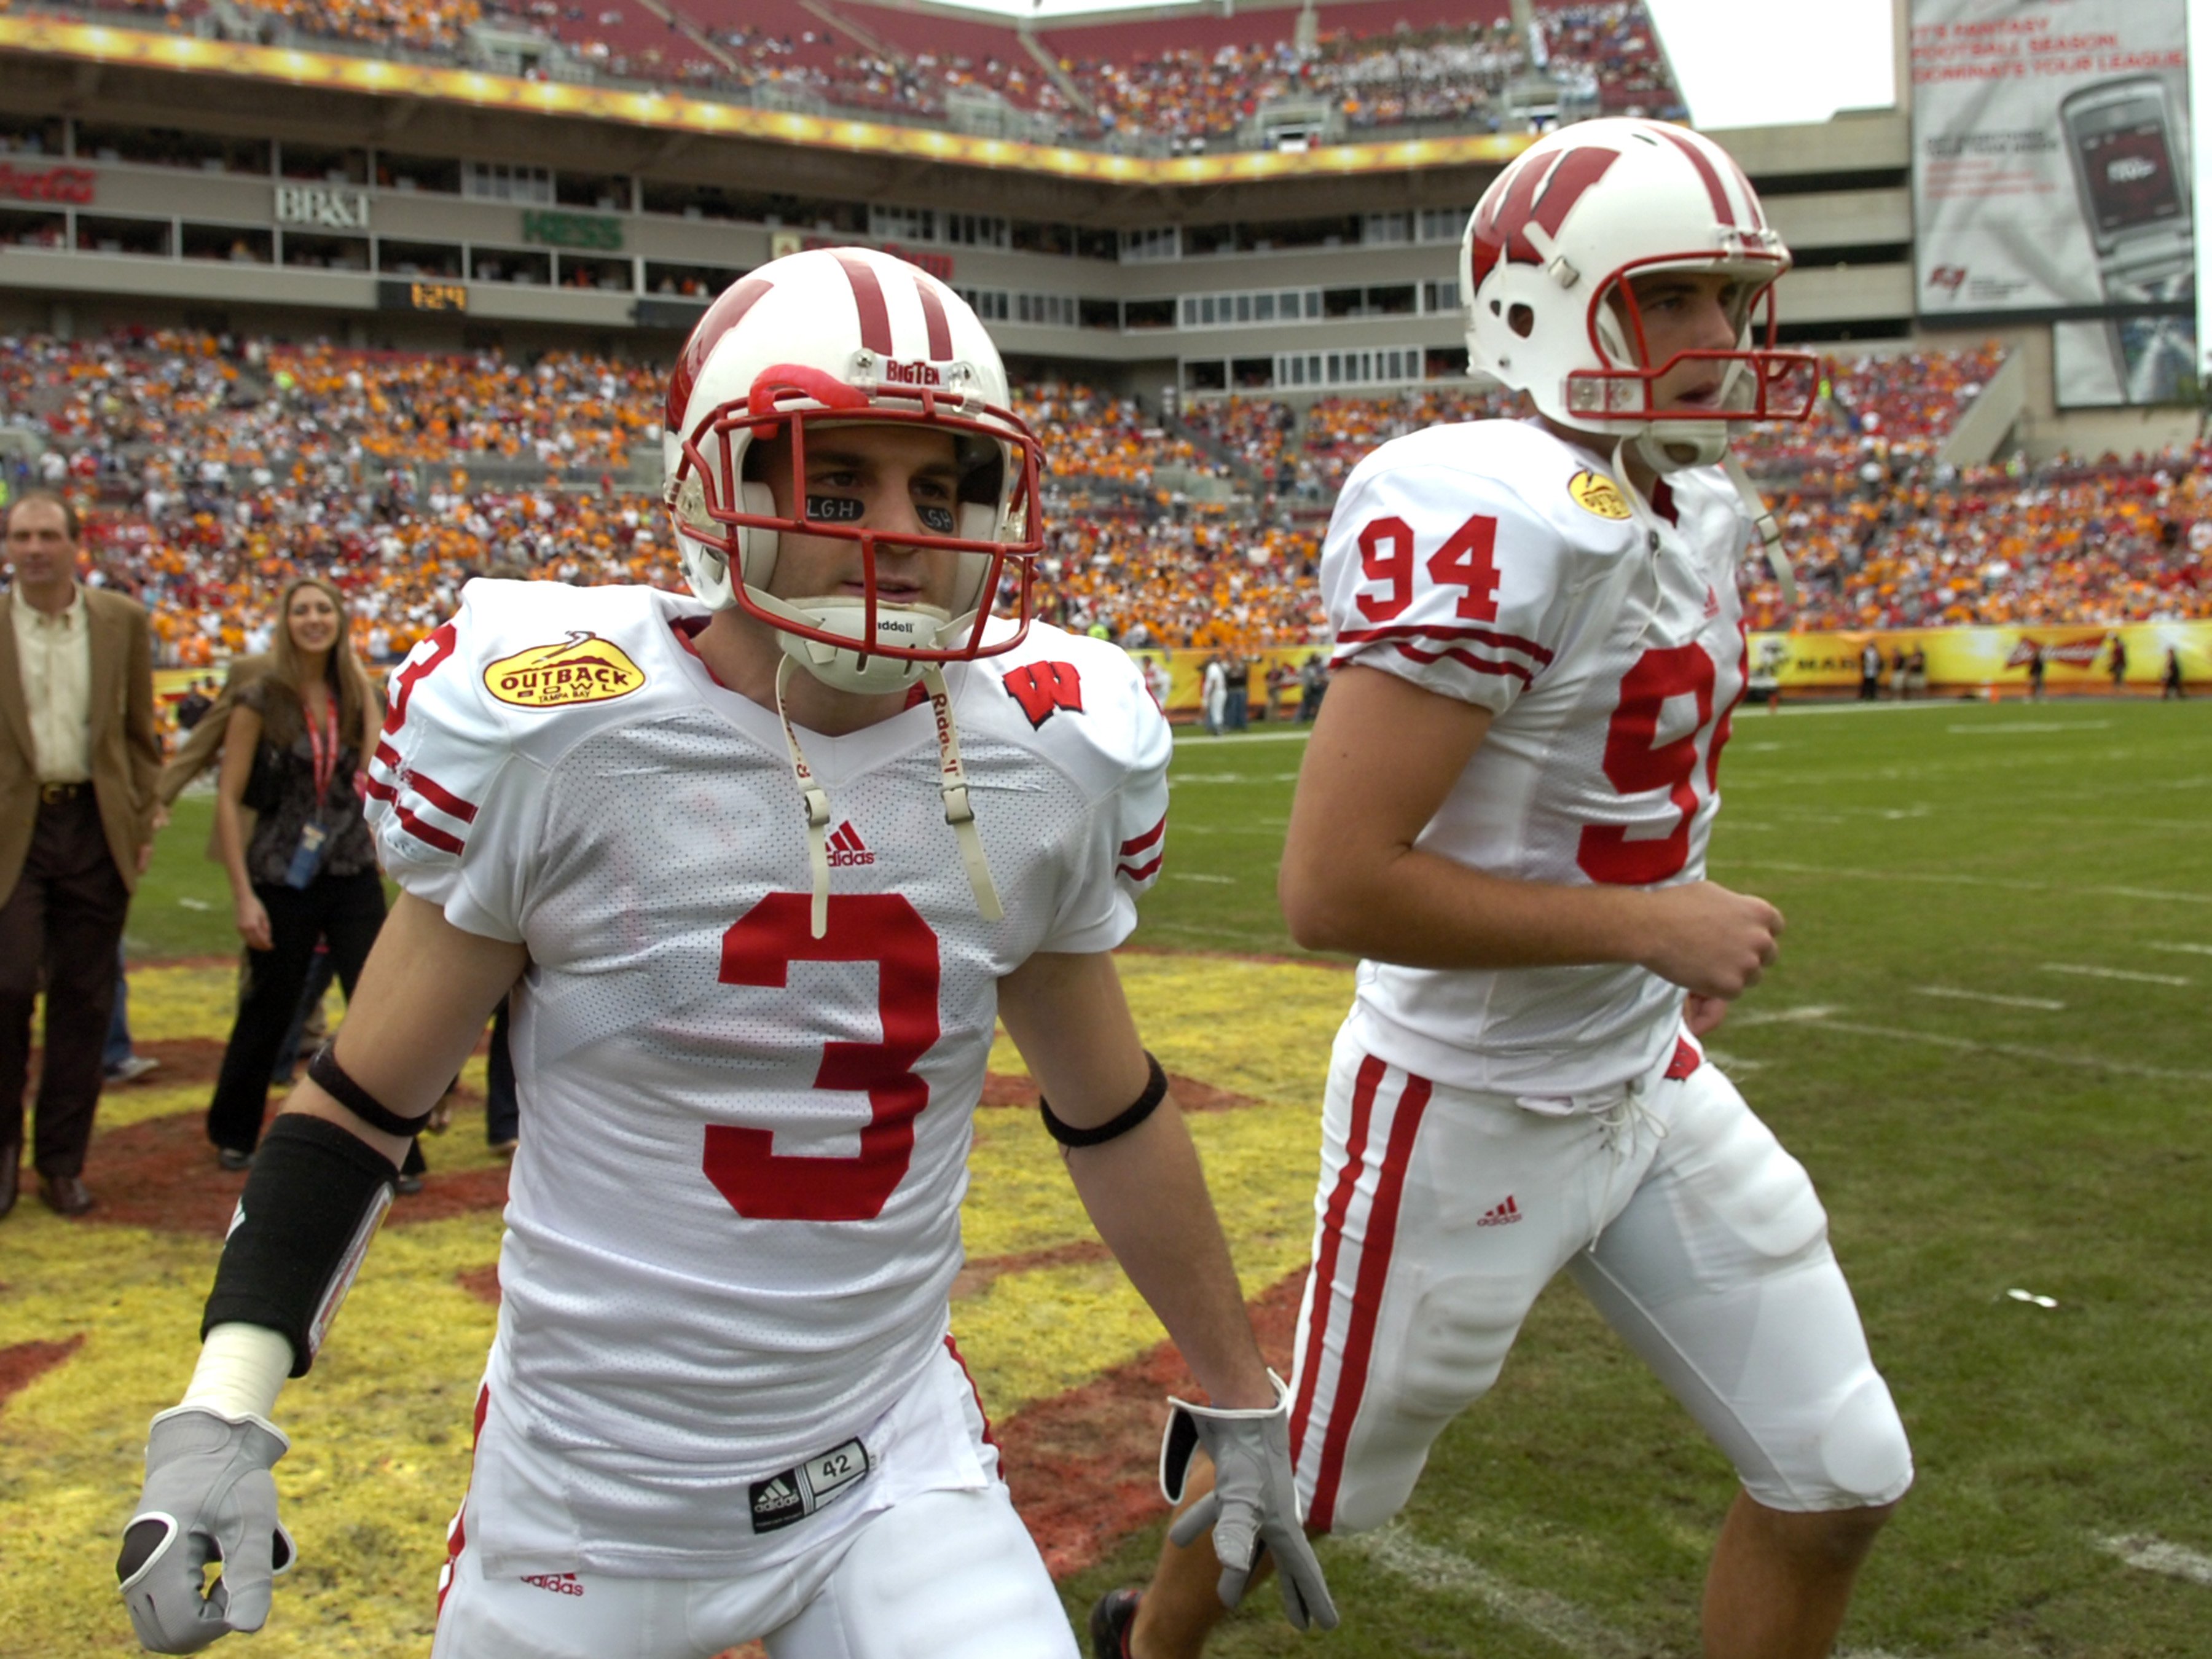 TAMPA, FL -  JANUARY 1: Defensive back Ben Strickland #3 and punter Ken DeBauche #94 of the Wisconsin Badgers set for play  against the Tennessee Volunteers in the 2008 Outback Bowl at Raymond James Stadium on January 1, 2008 in Tampa, Florida.  The Volun